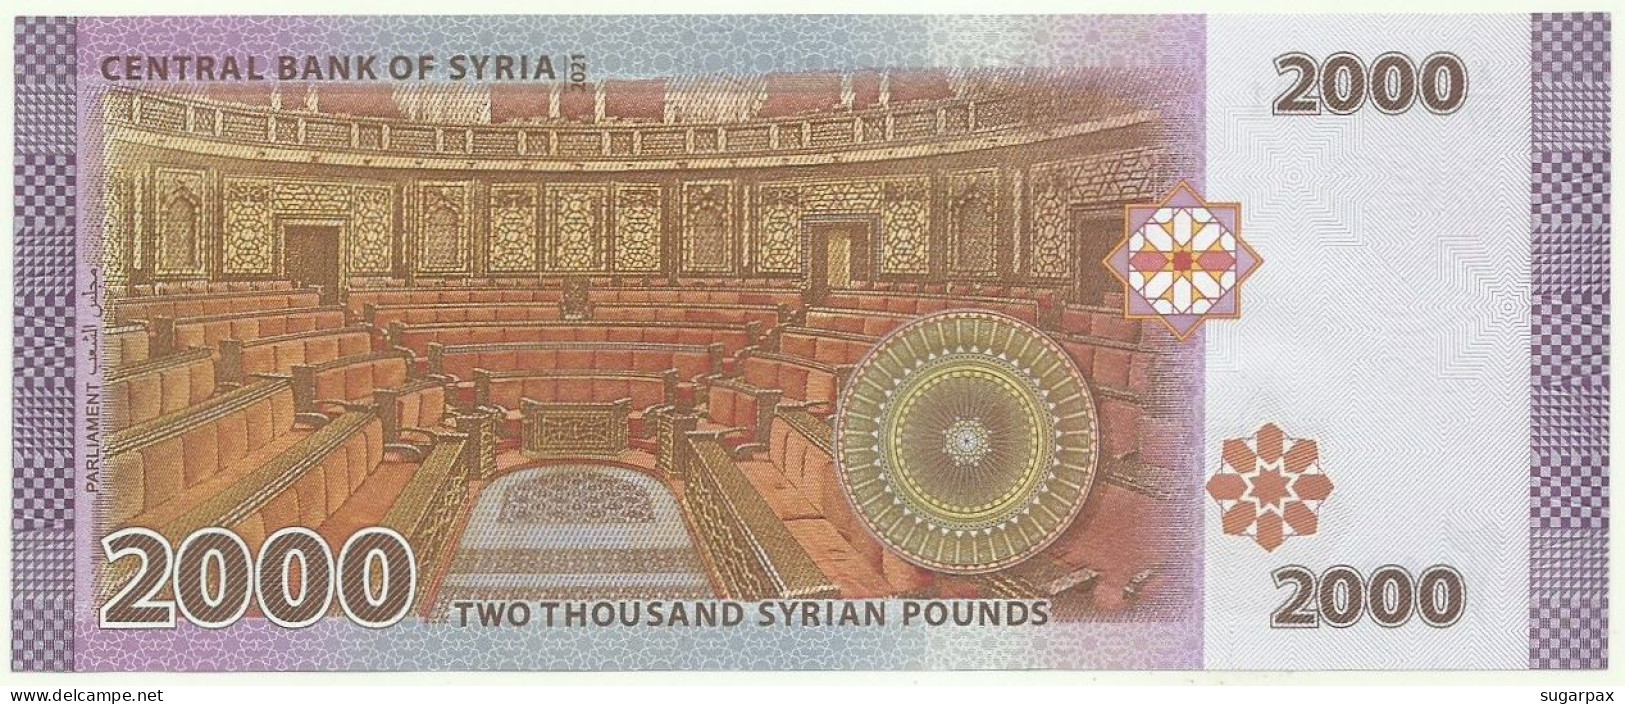 Syria - 3 X 2000 Syrian Pounds - 2021 / AH 1442 - Pick 117.NEW - Unc. - Serie A/57 - 2.000 - Syria